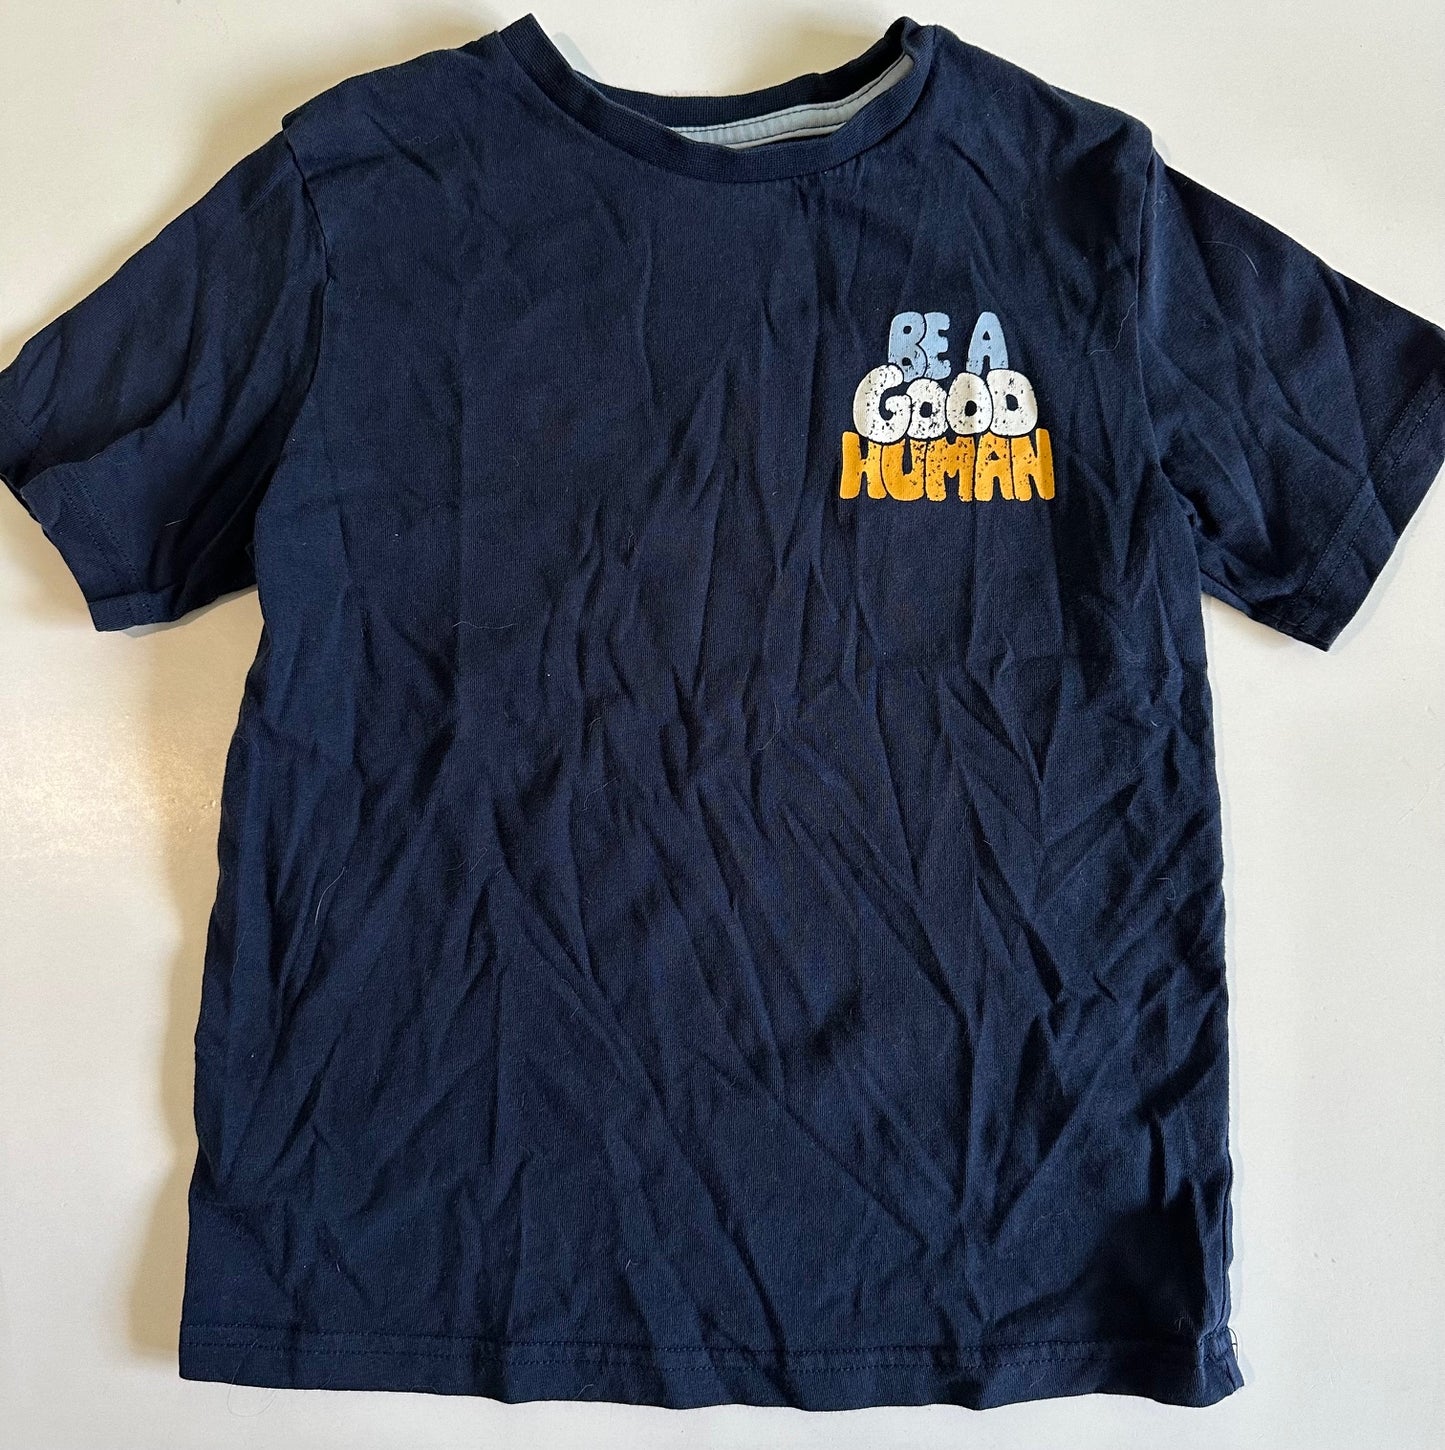 George, Navy Blue "Be a Good Human" T-Shirt - Size Small (6)